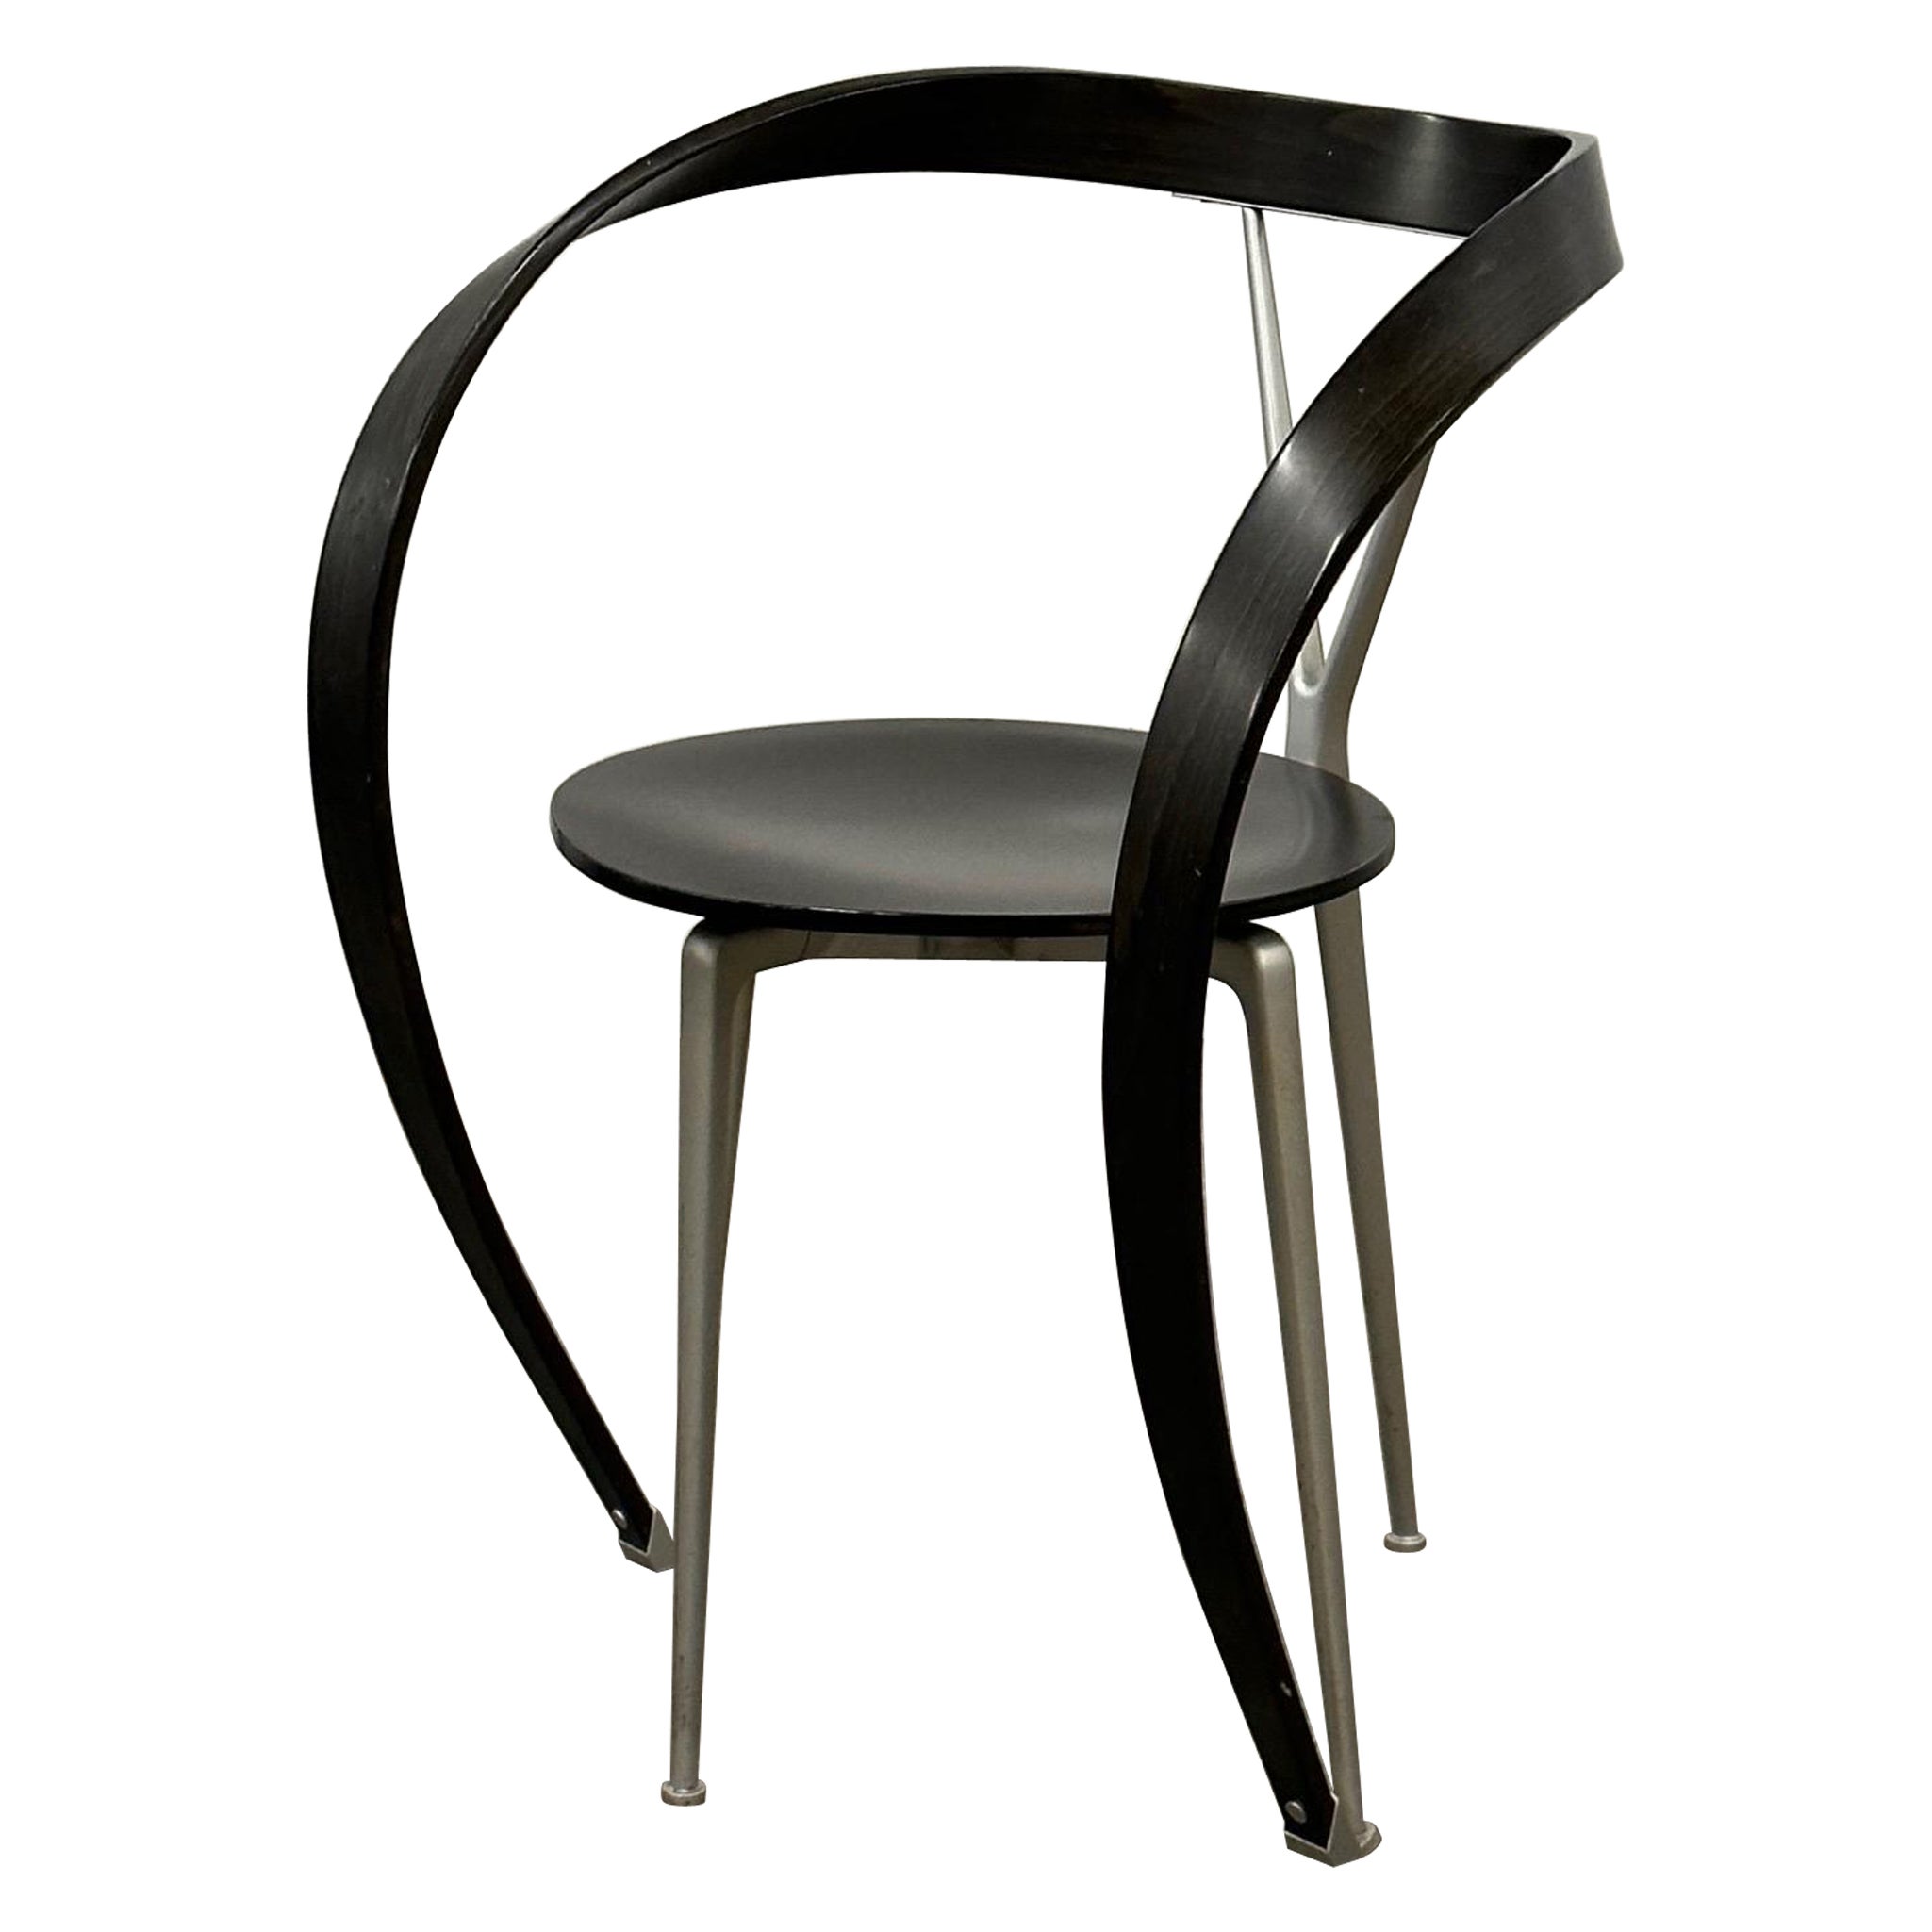 Revers Chair by Andrea Branzi for Cassina